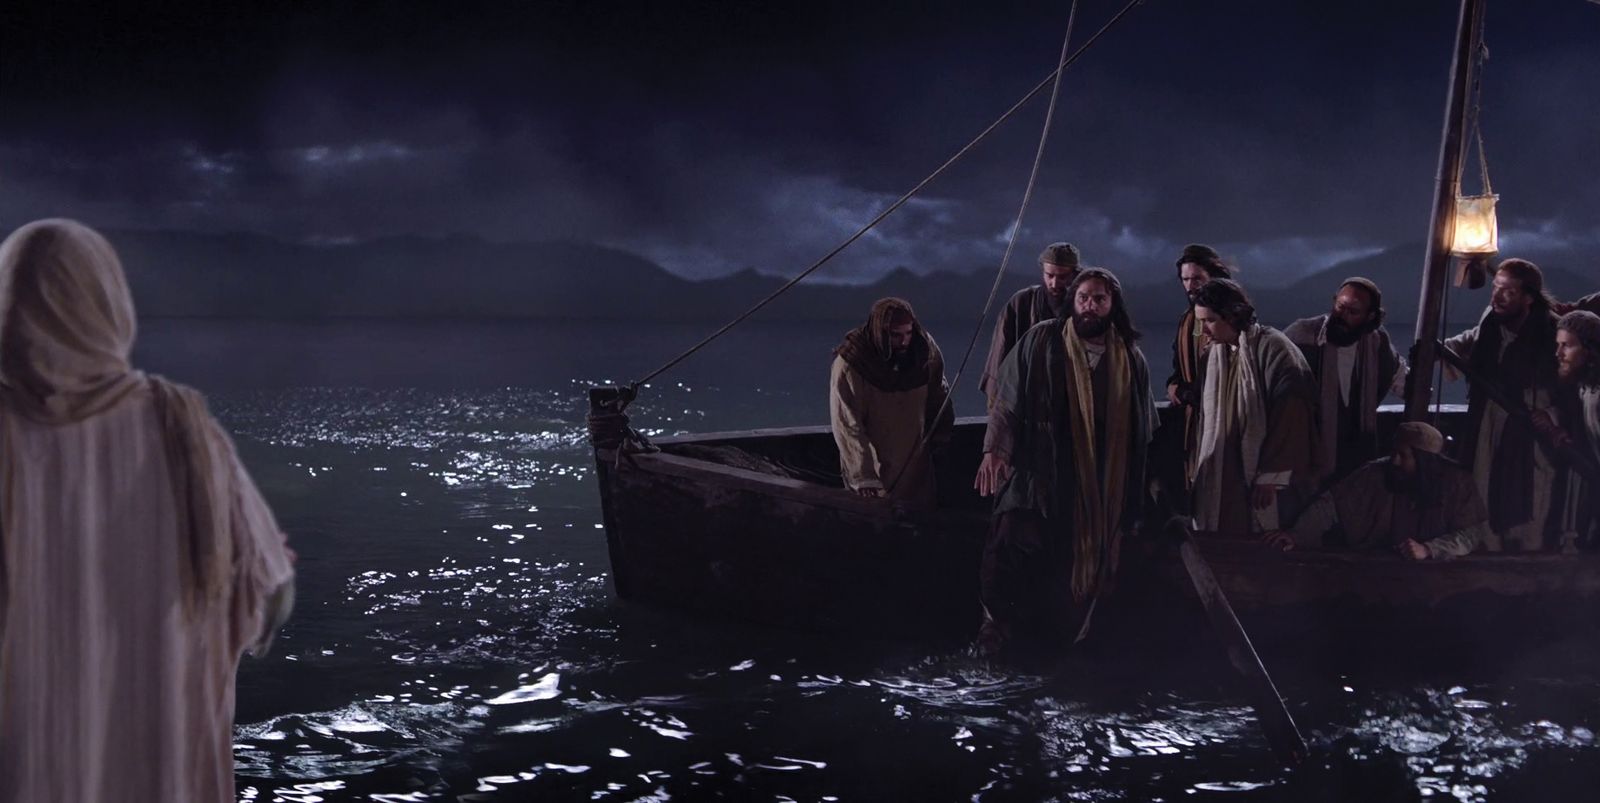 The disciples in their ship see Jesus walking on water.